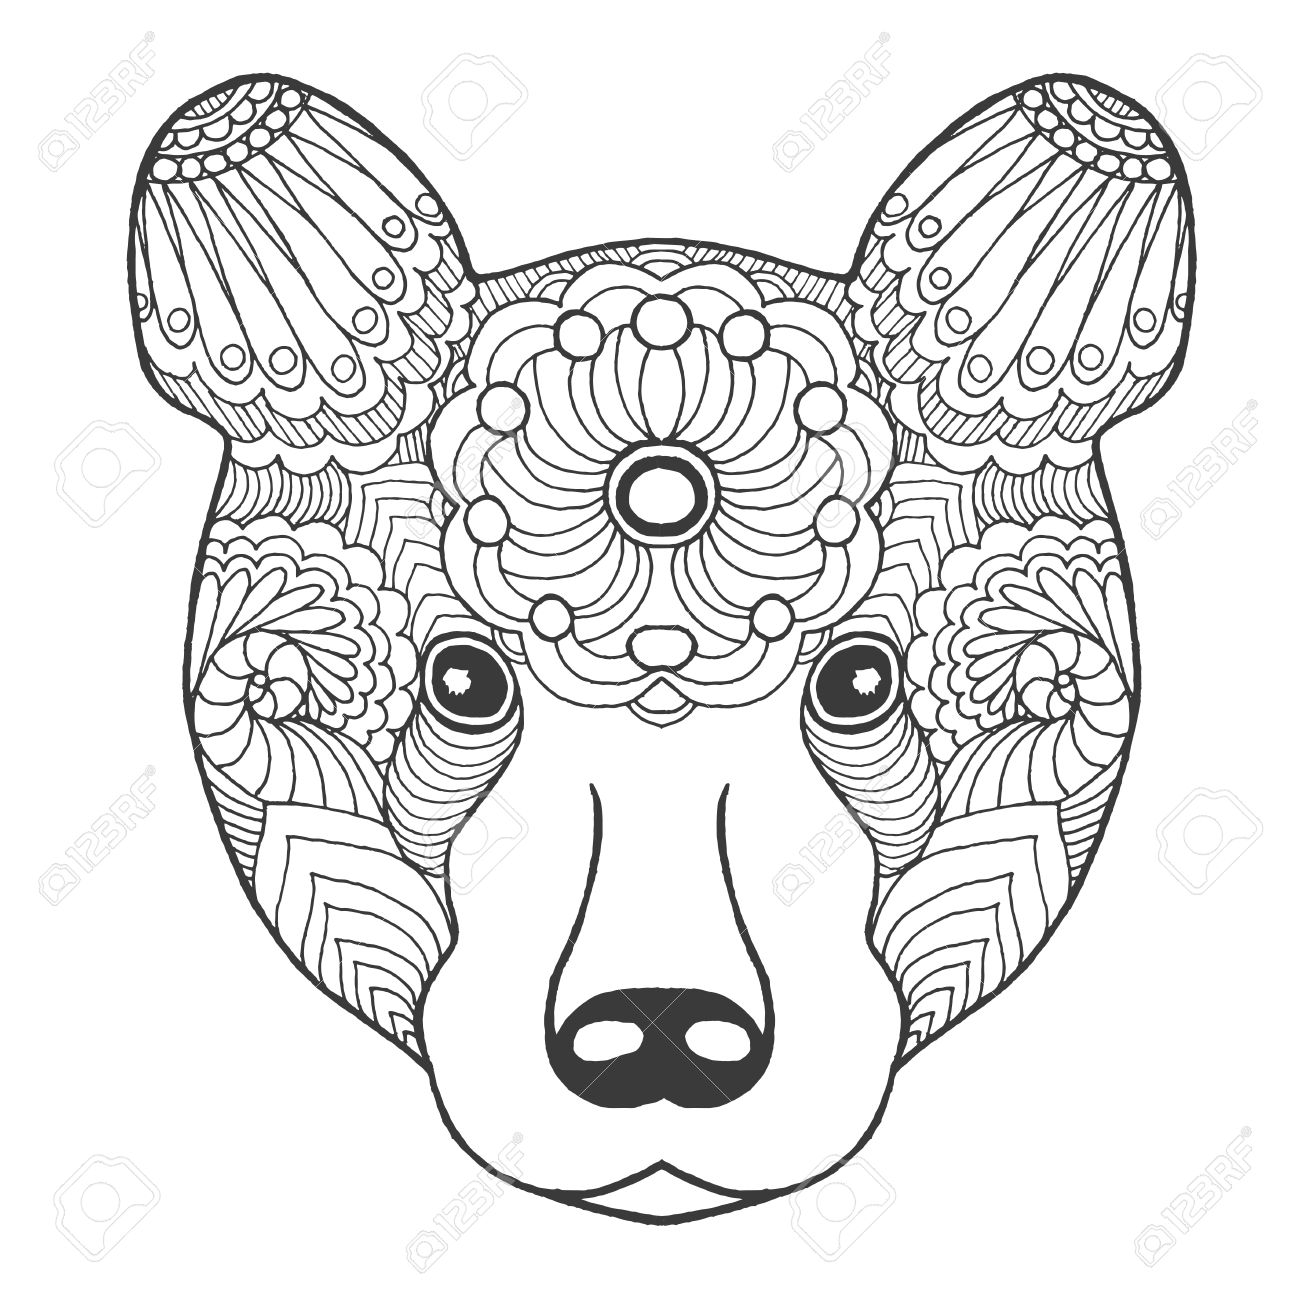 Cute bear black white hand drawn doodle animal ethnic patterned vector illustration african indian totem tribal zentangle design sketch for coloring page tattoo poster print t